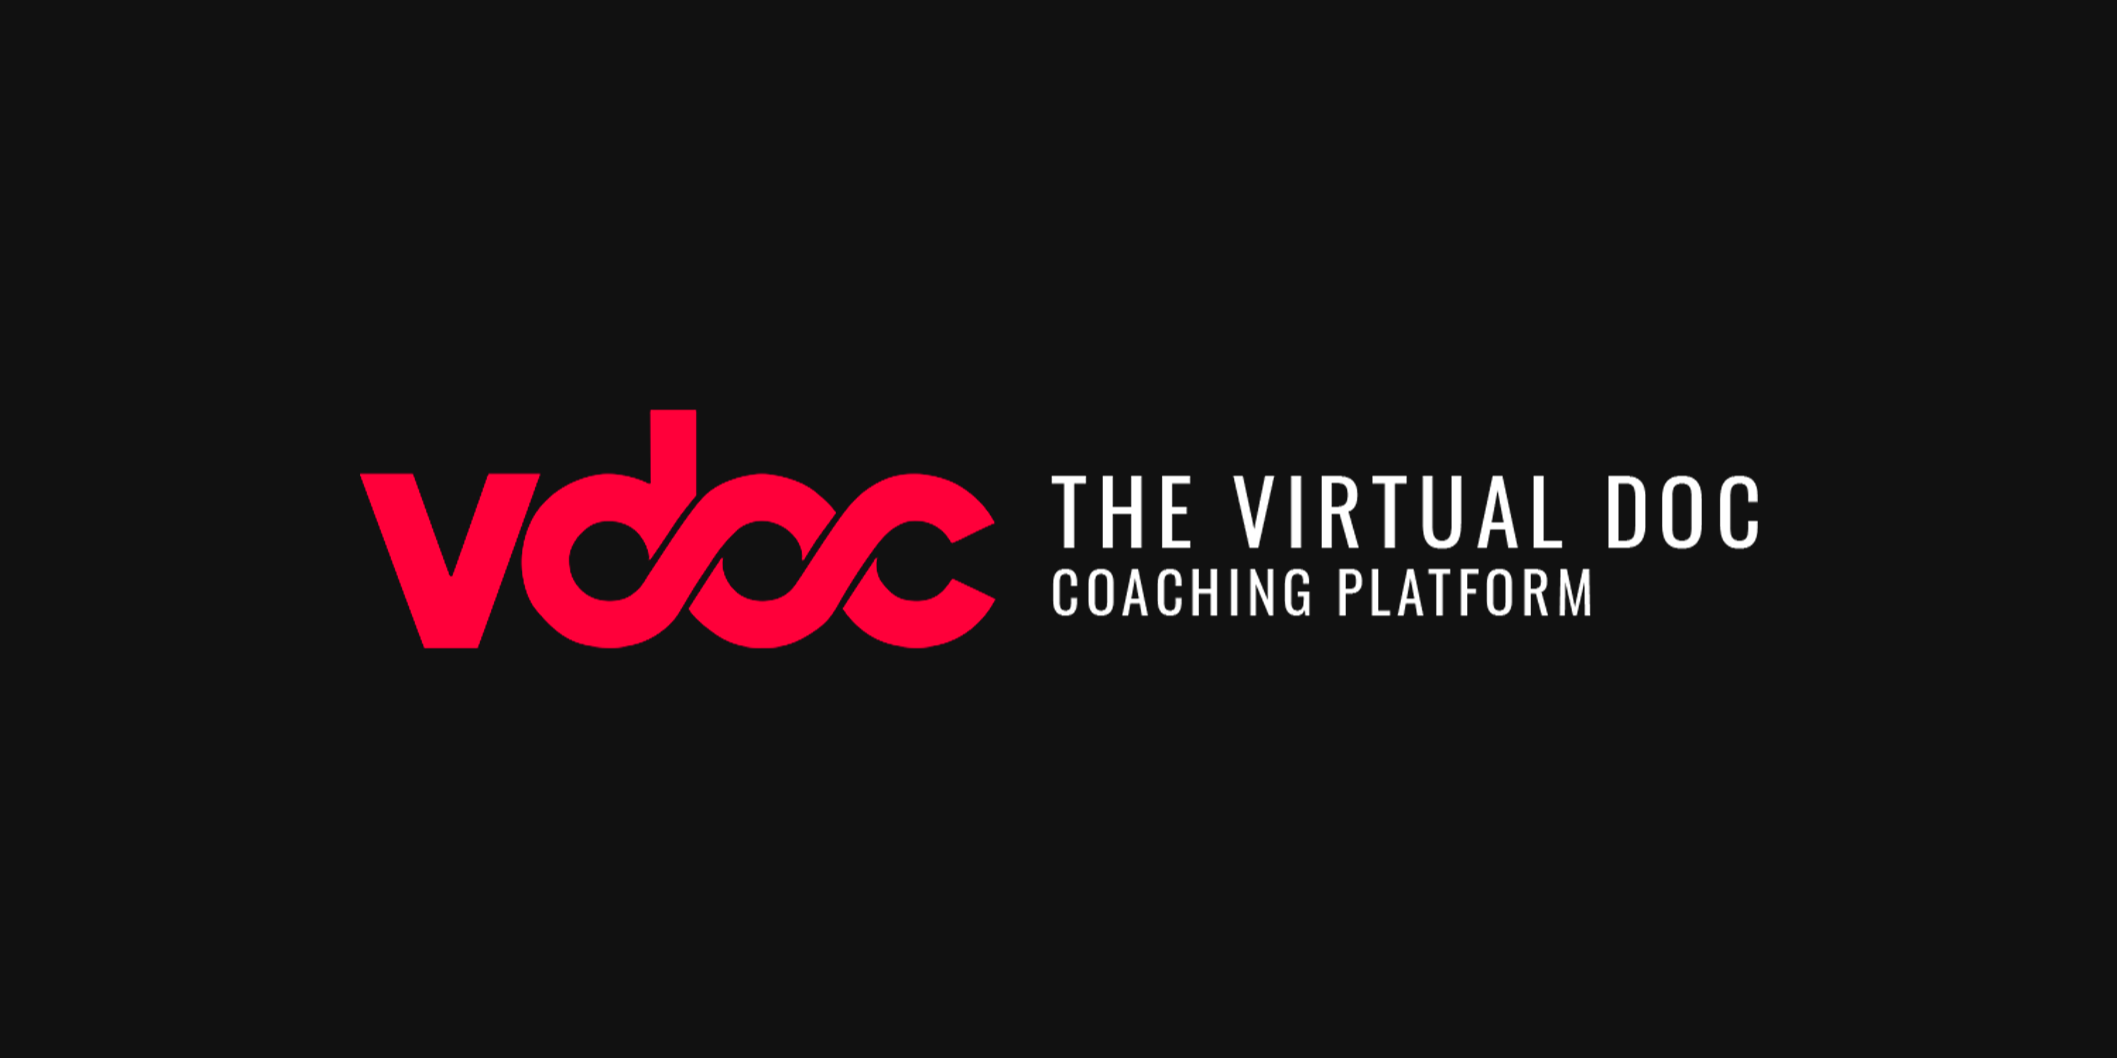 VDOC CARD